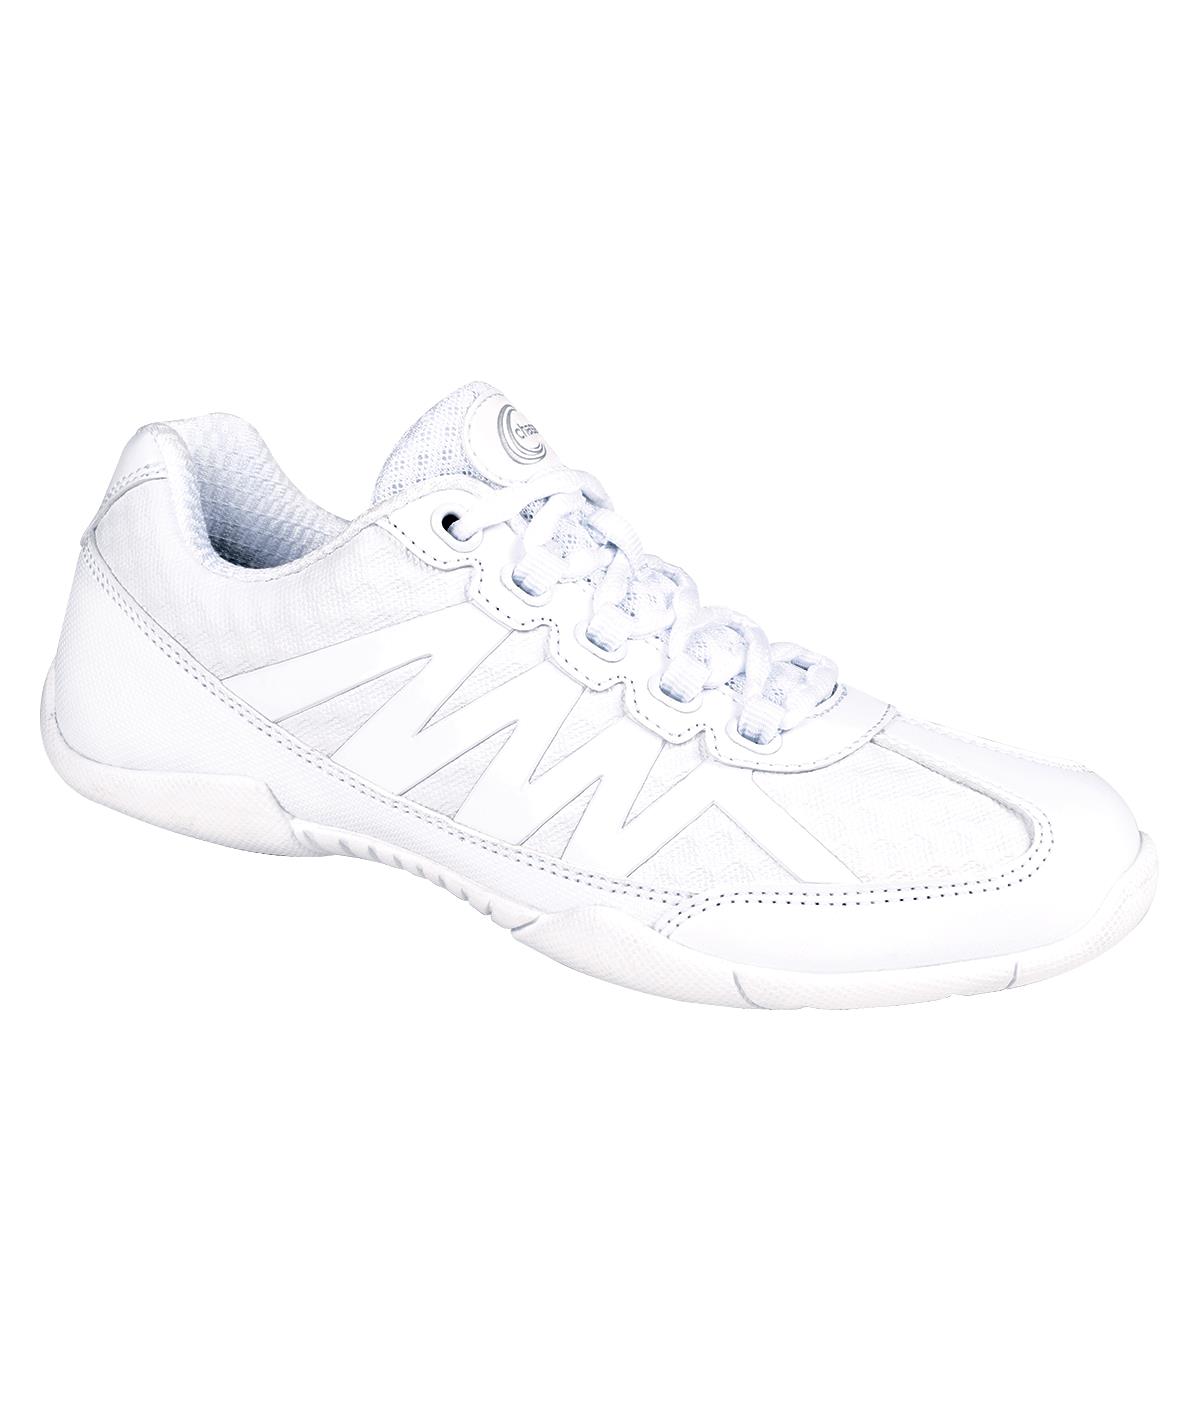 Learner That naked Chasse Apex Shoe - Cheerleading Shoes | Omni Cheer